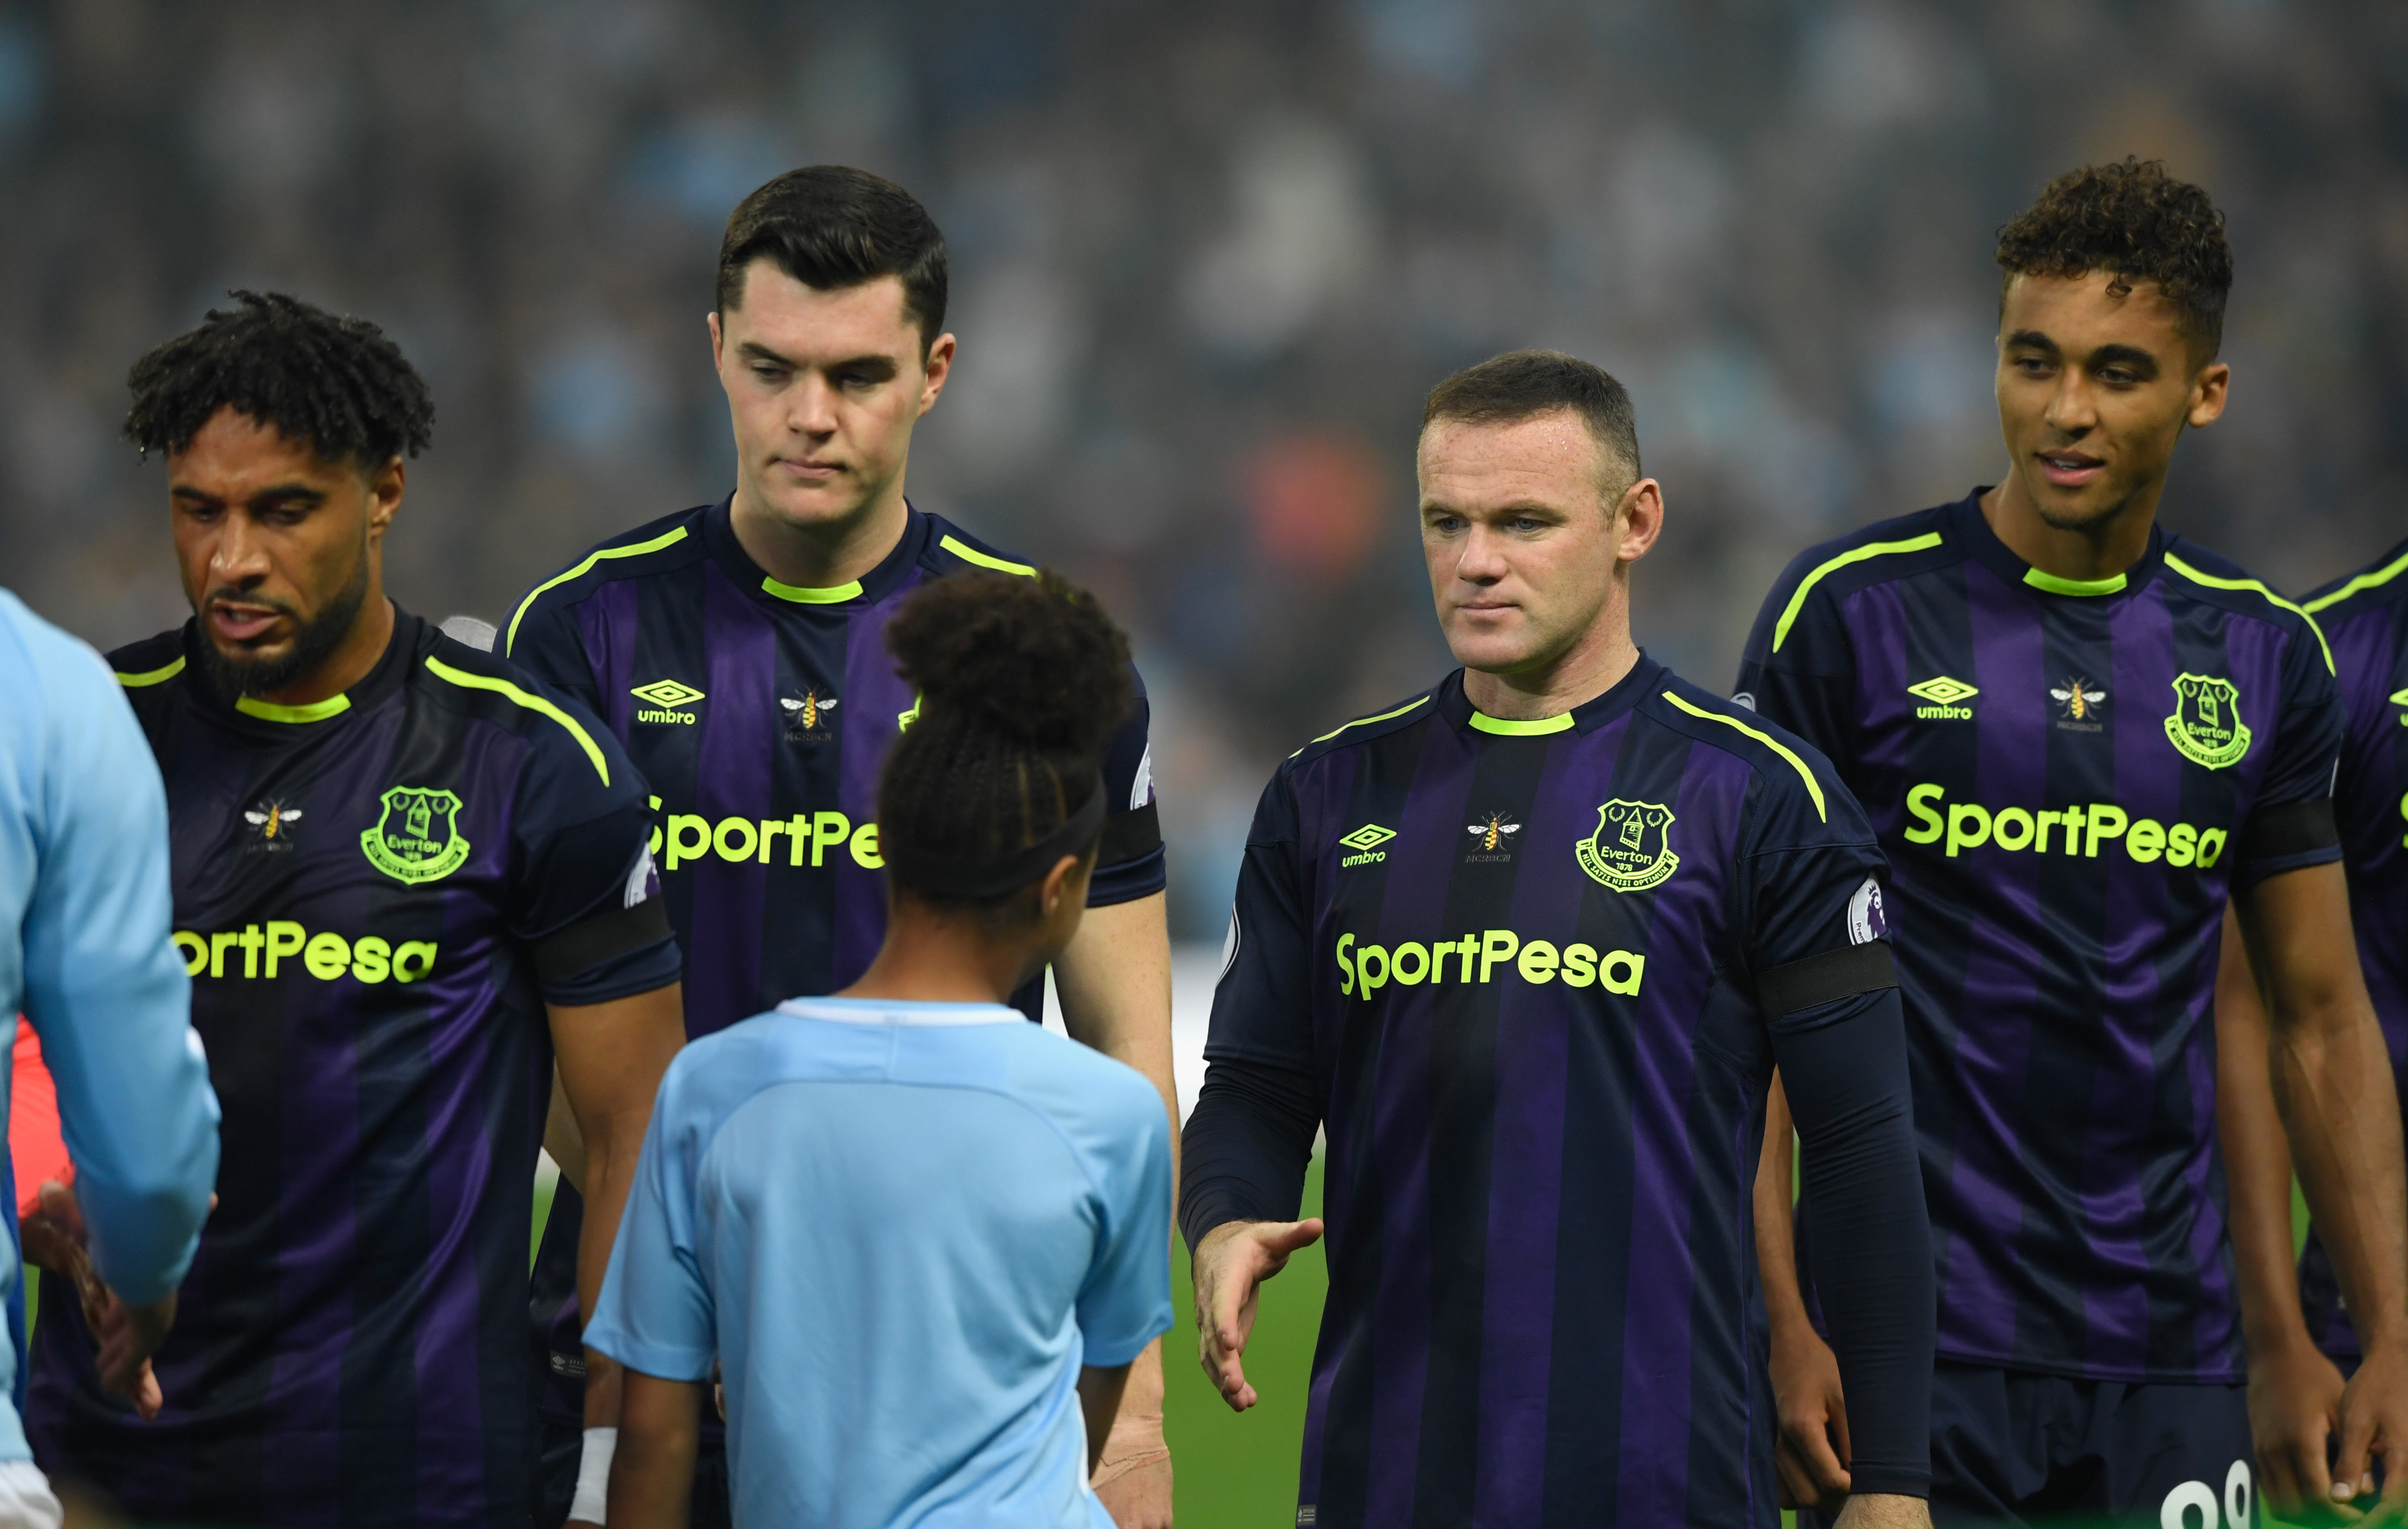 MANCHESTER, ENGLAND - AUGUST 21:  Everton player Wayne Rooney shakes the hand of the mascot before the Premier League match between Manchester City and Everton at Etihad Stadium on August 21, 2017 in Manchester, England.  (Photo by Stu Forster/Getty Images)